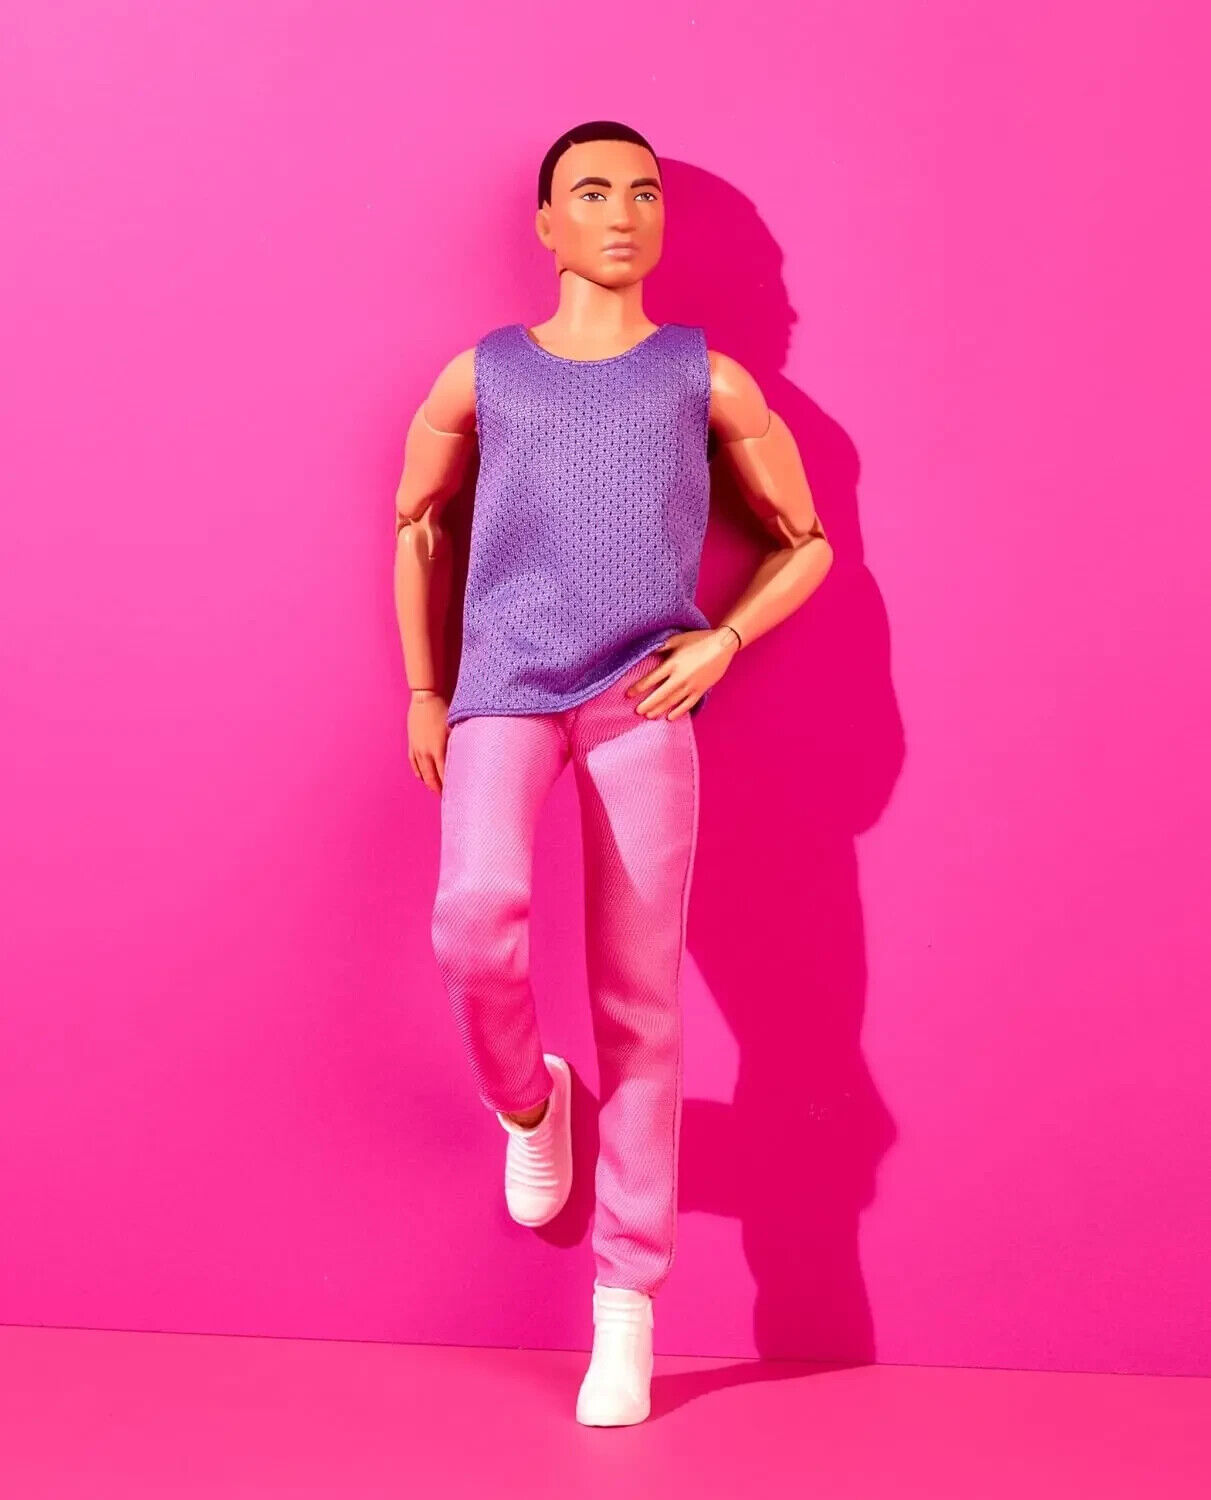 Looks Ken Doll with Black Hair Dressed in Purple Mesh Top and Pink Trousers, Pos